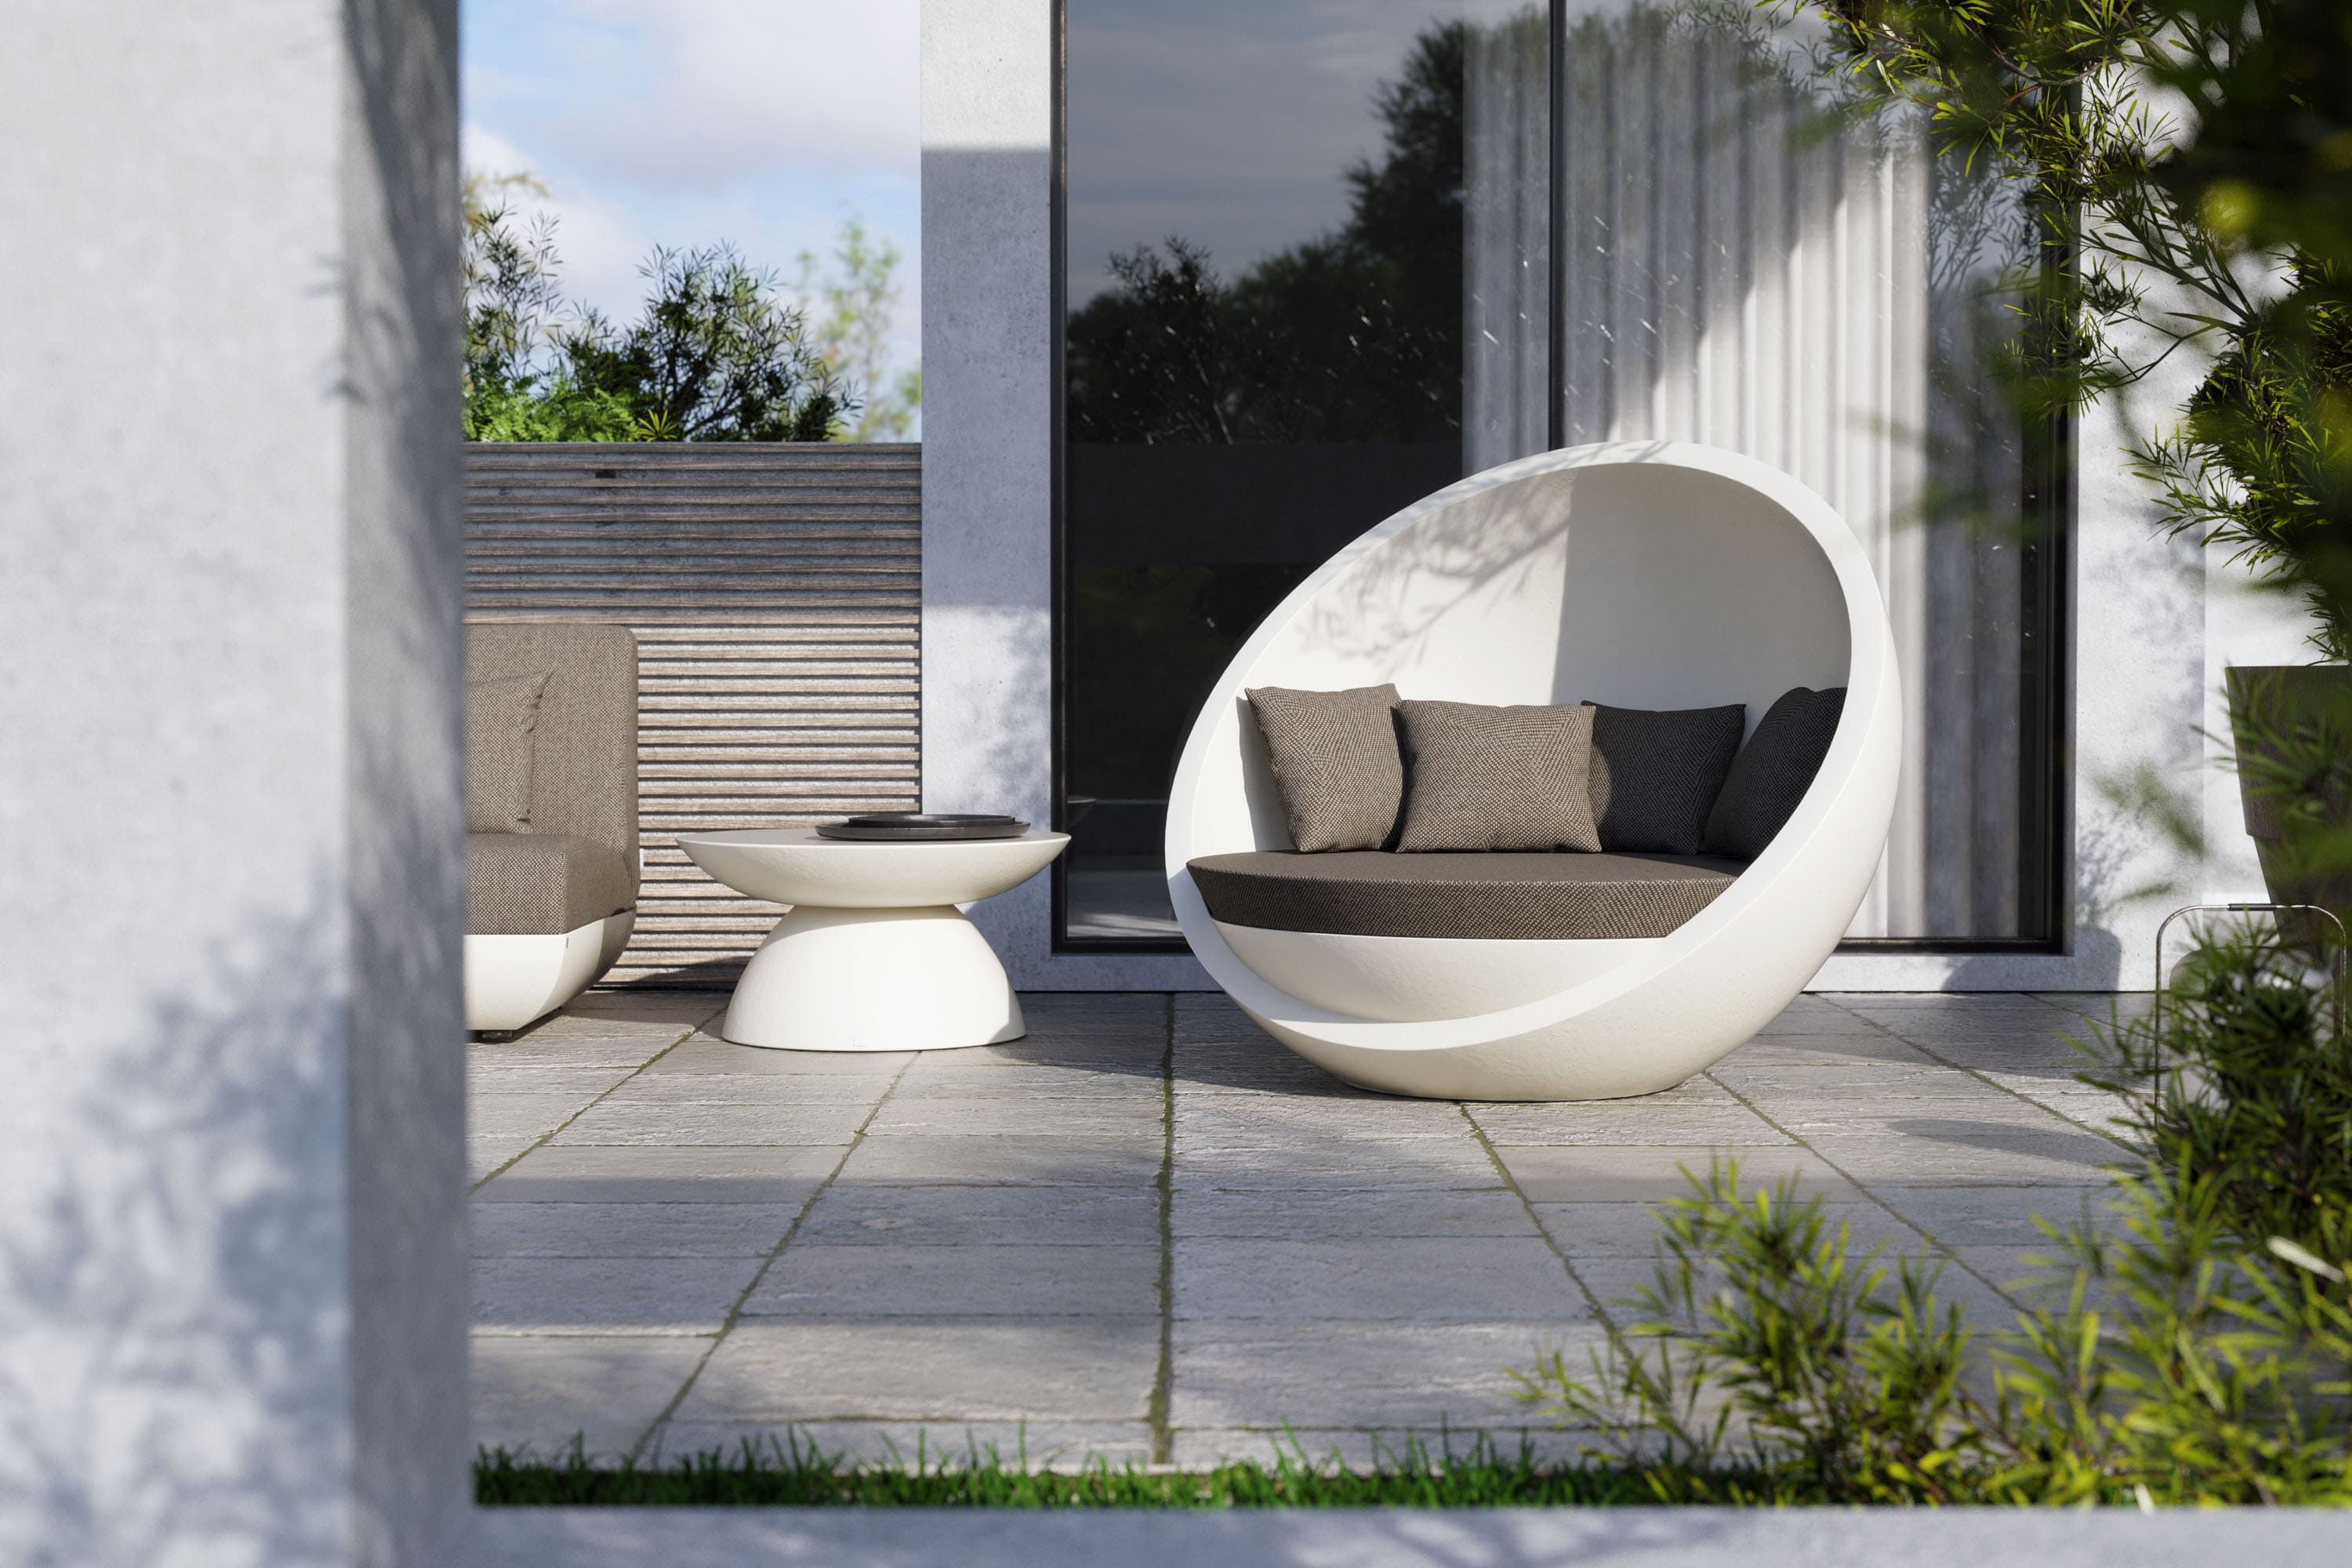 Relaxing ambience on terrace with Bola sofa and Oceano table